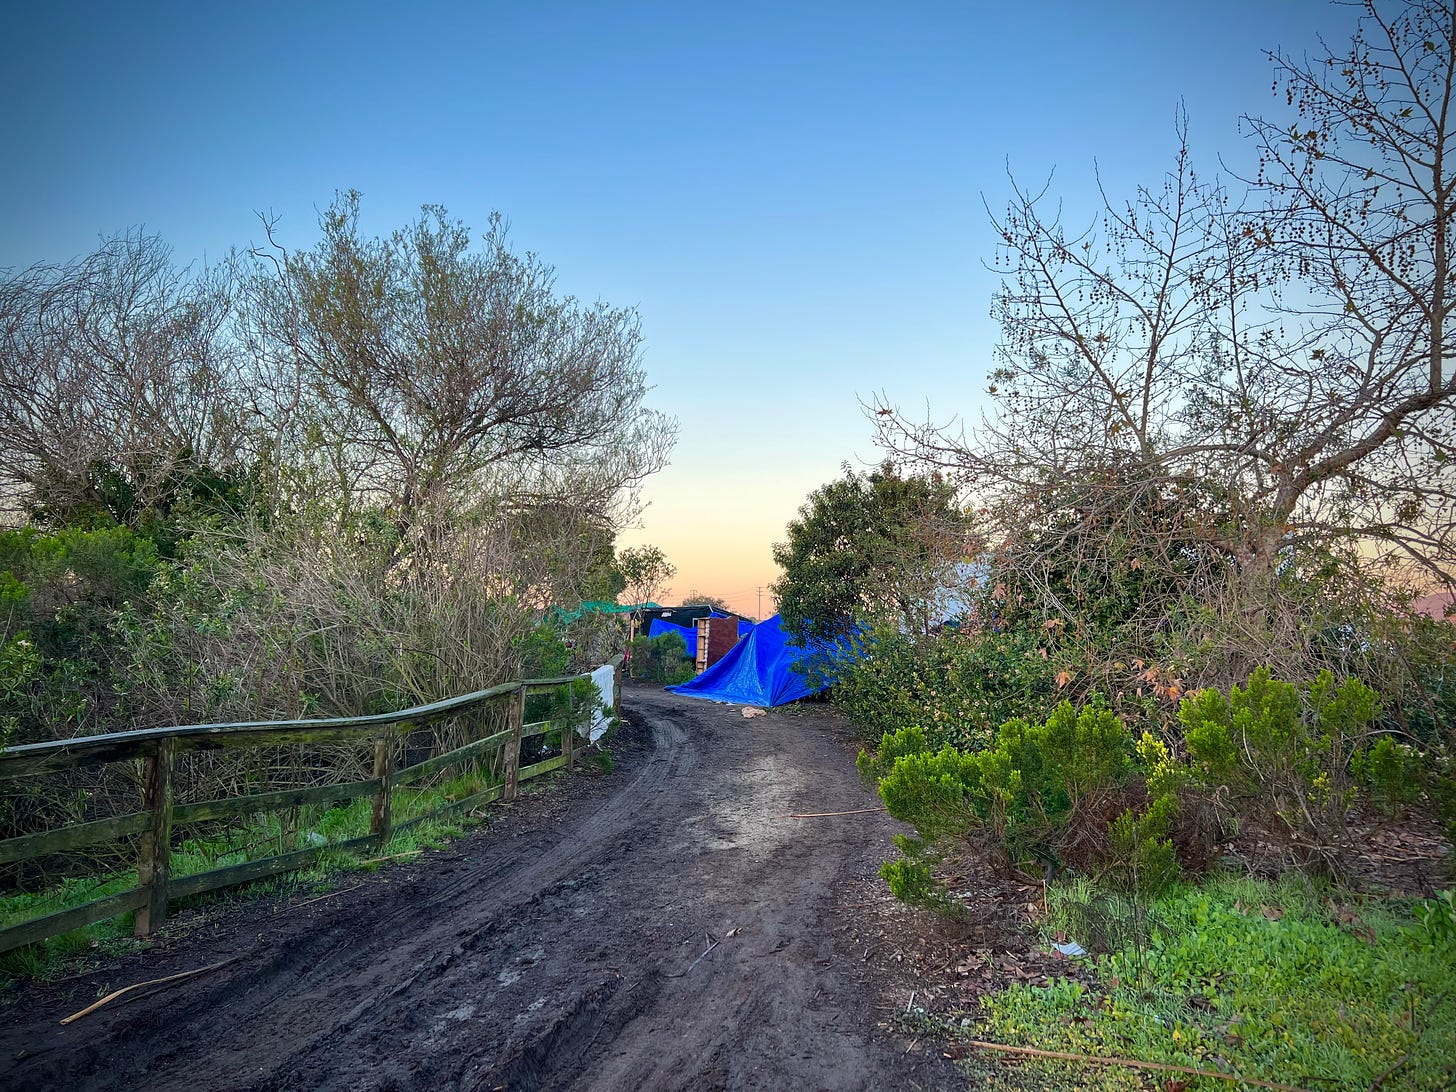 Picture of a muddy vehicular trail through a wildlife preserve, green foliage on either side leading to the beginning of a homeless camp evident from the blue tarps hung over improvised shelters